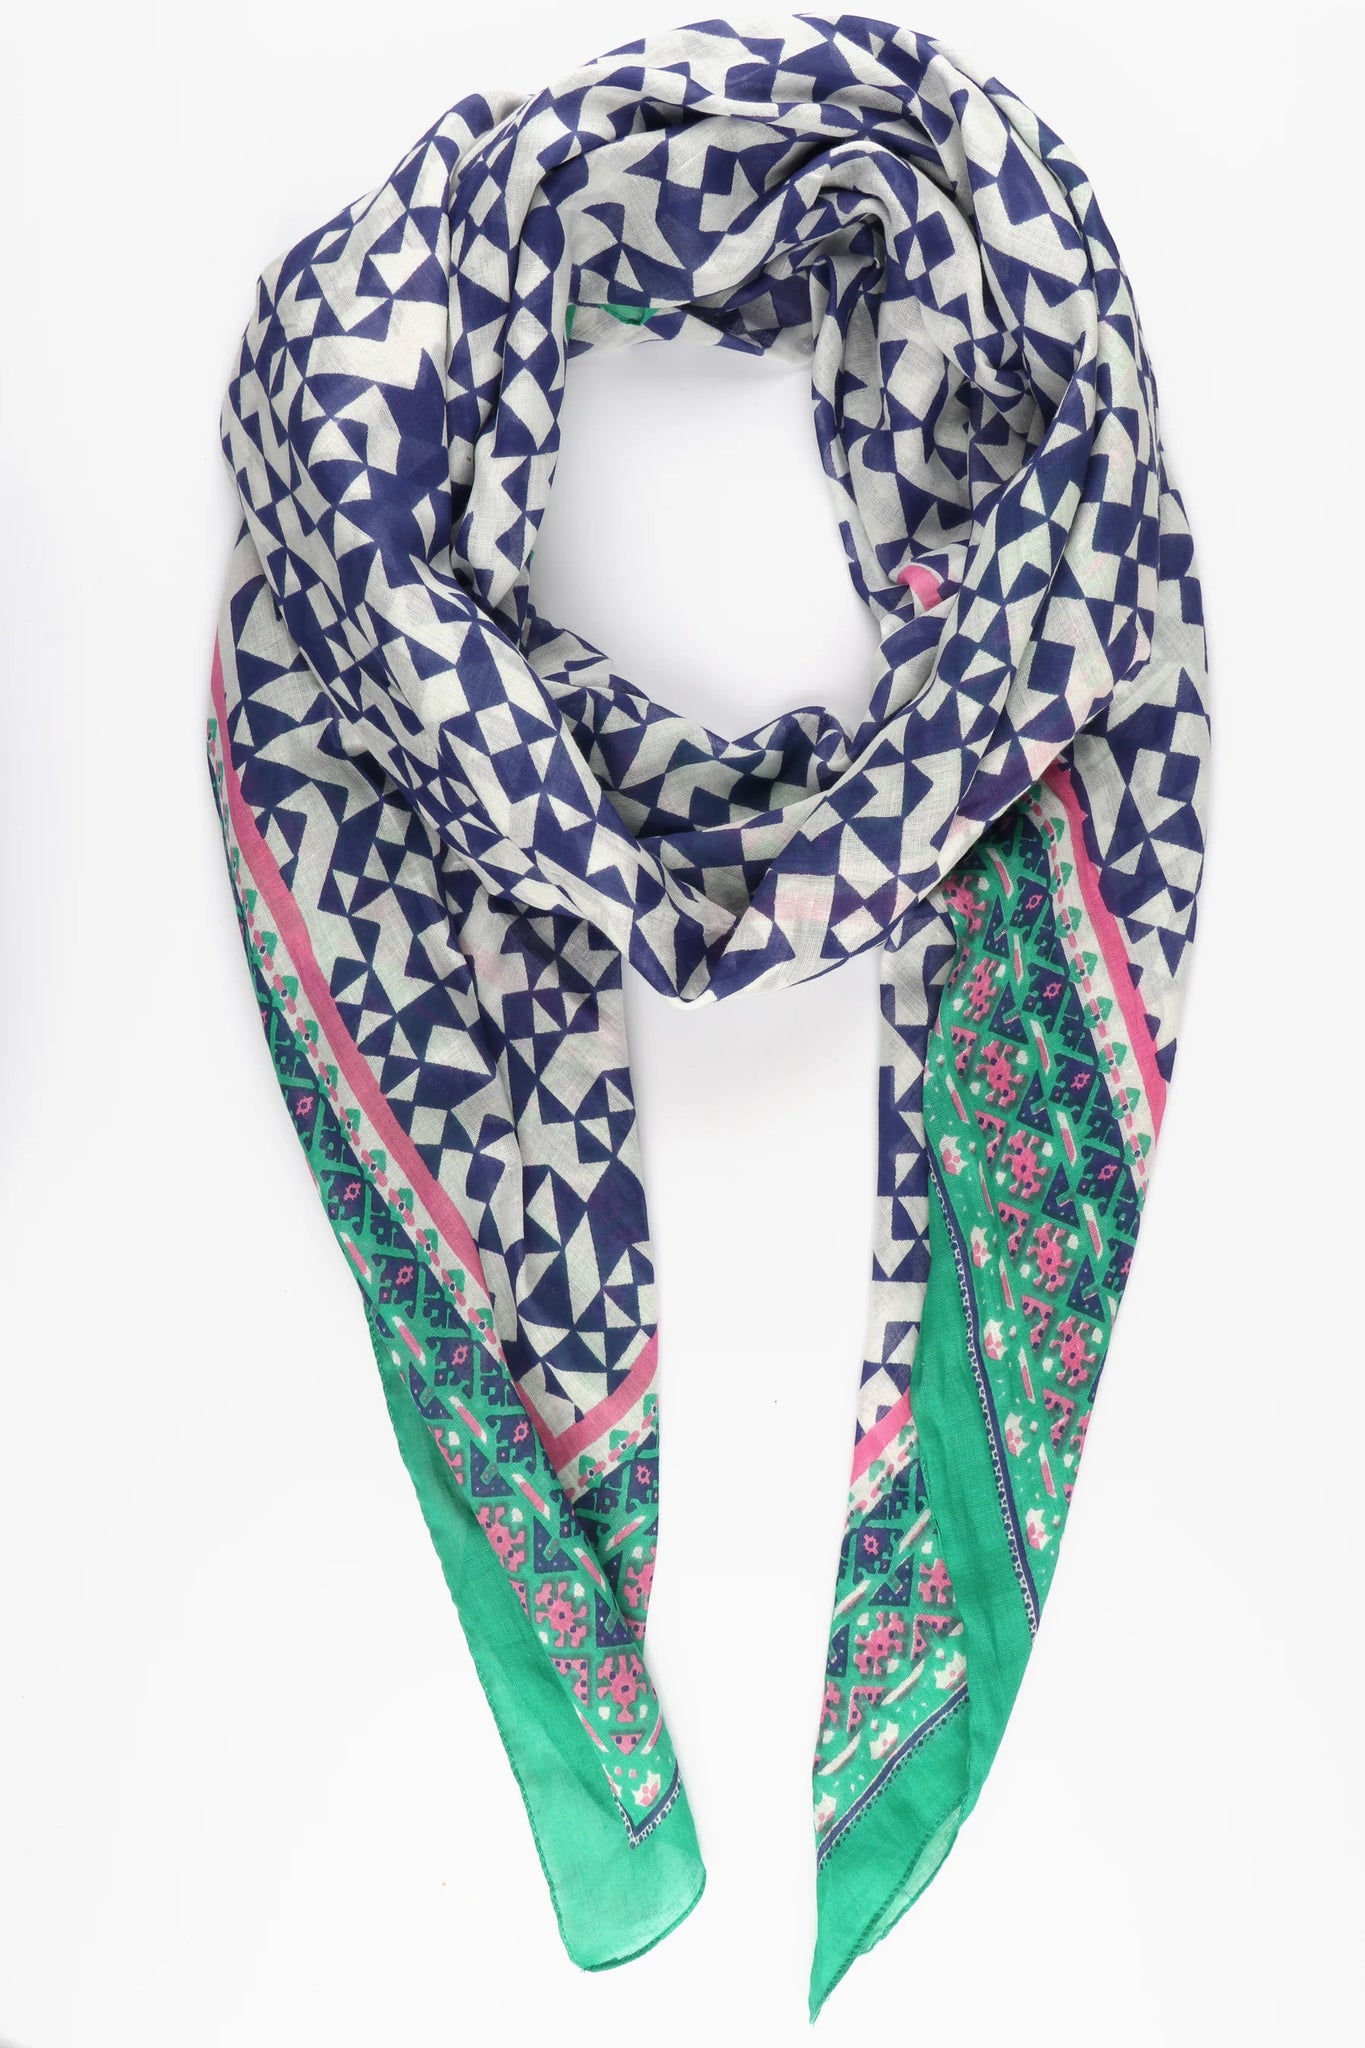 Mosaic Print Bordered Cotton Scarf in Navy Blue